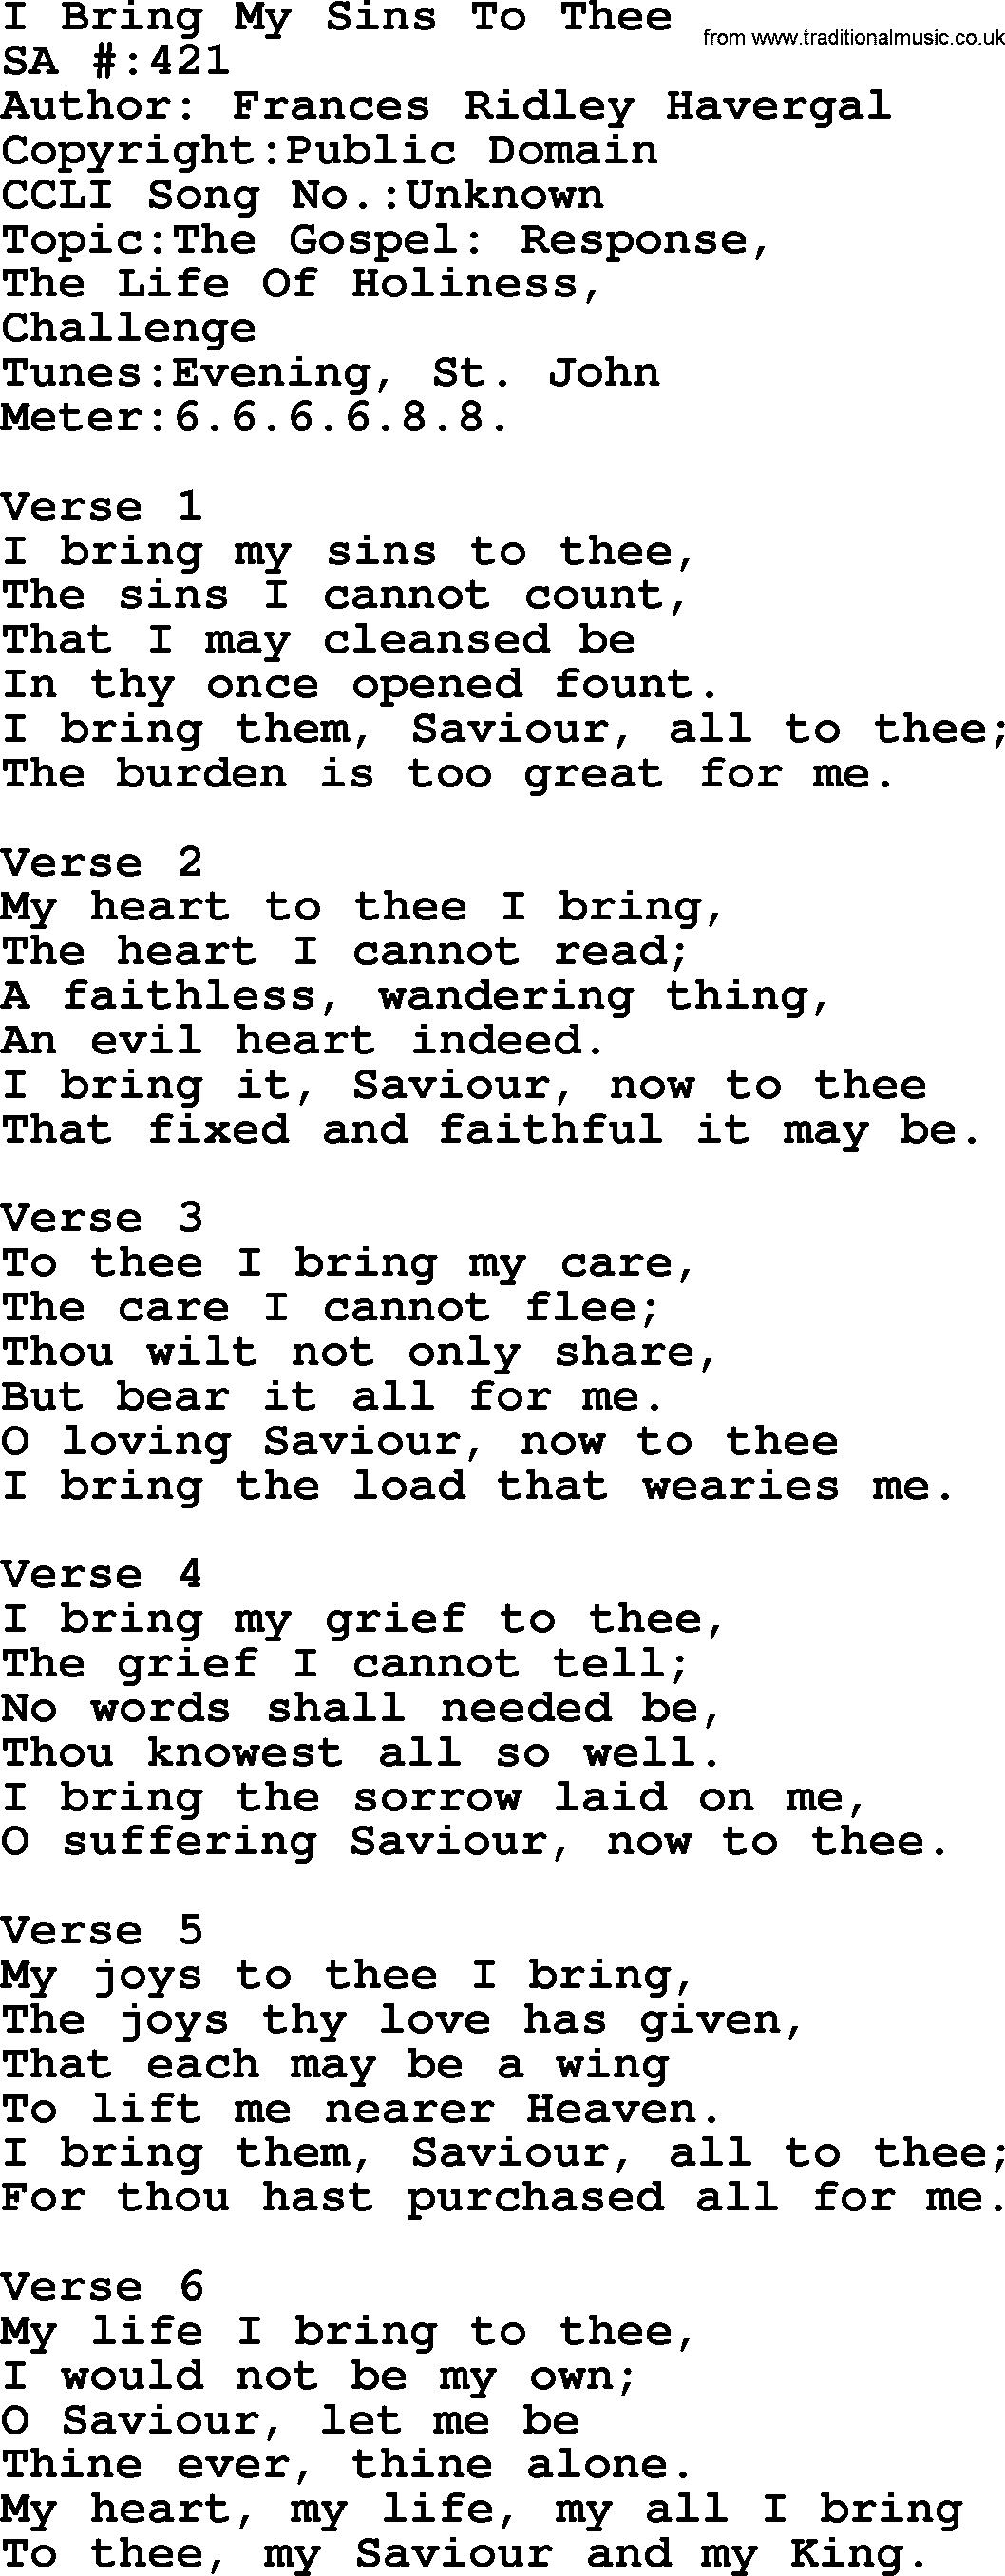 Salvation Army Hymnal, title: I Bring My Sins To Thee, with lyrics and PDF,